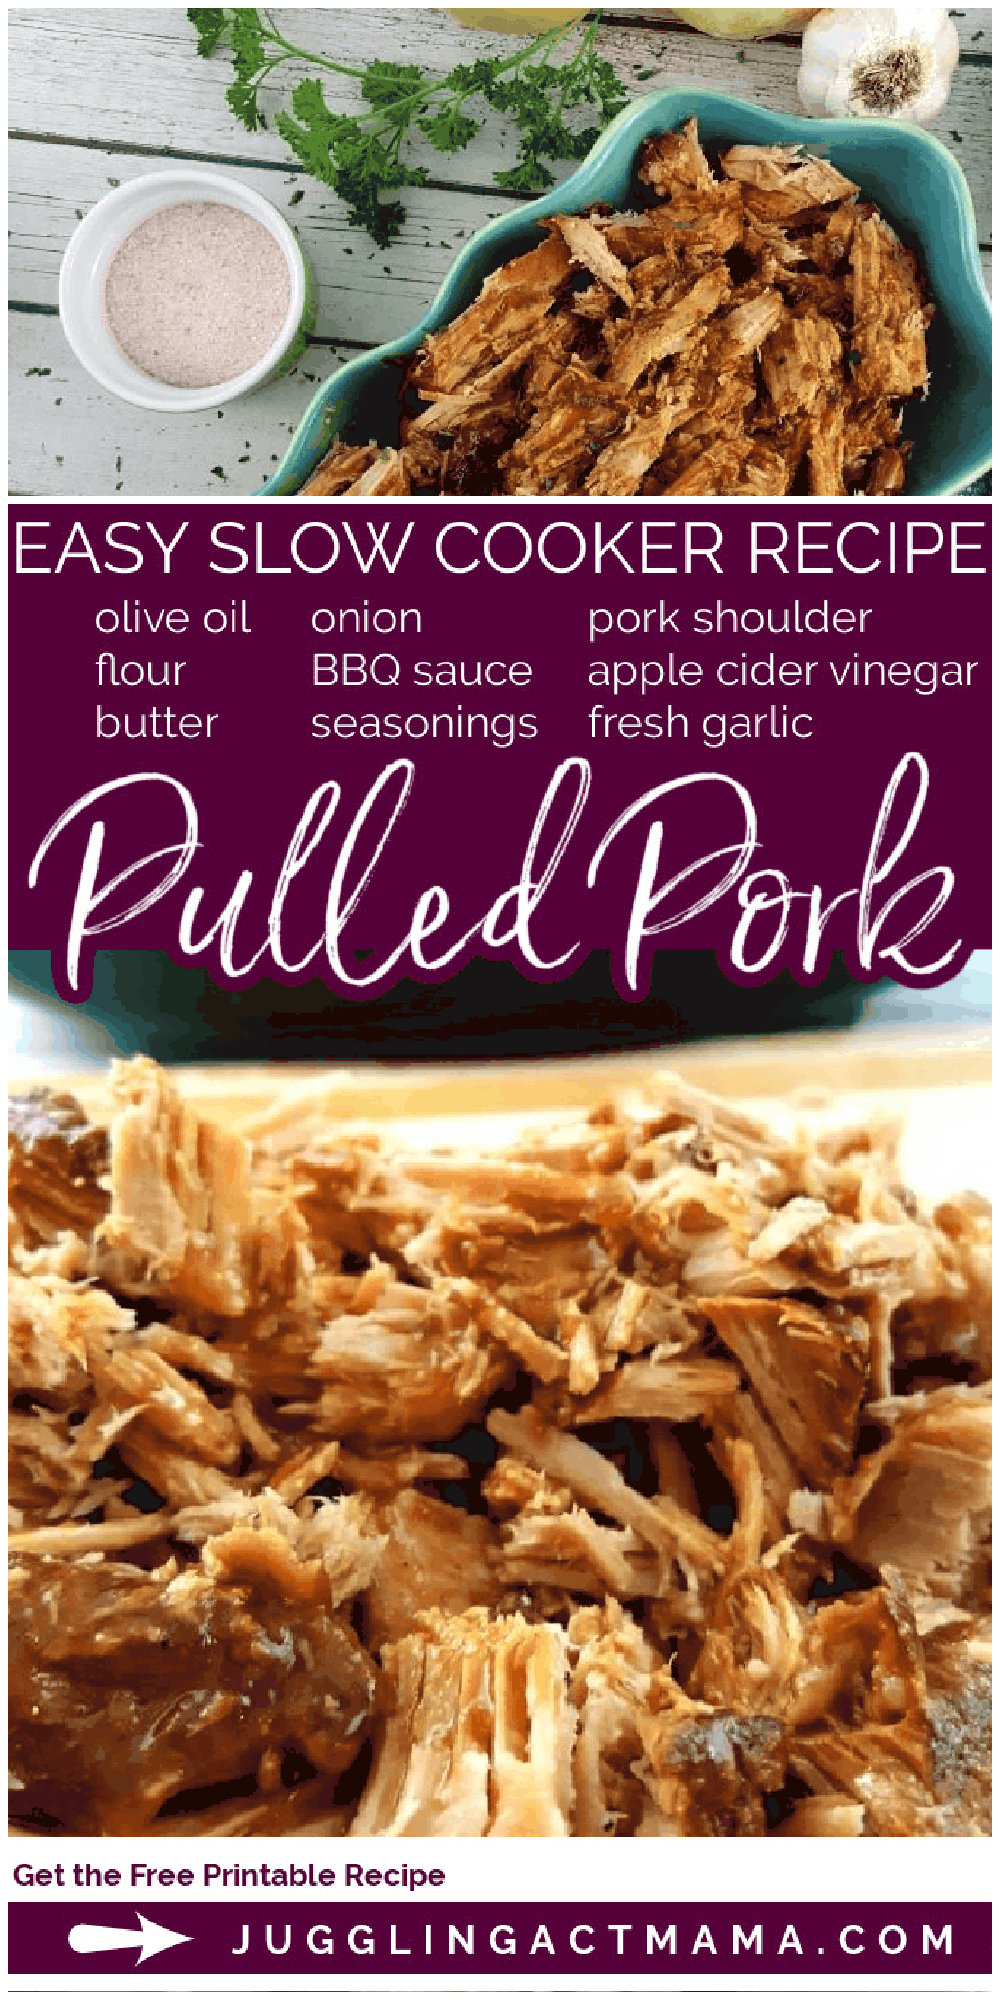 My classic Slow Cooker Pulled Pork Recipe is perfect for once a month or once a week cooking. I have tons of tips on how to freeze, what to serve with pulled pork and much more in this post. It is a versatile recipe with simple ingredients with a tried and true method for cooking pulled pork in a slow cooker! via @jugglingactmama